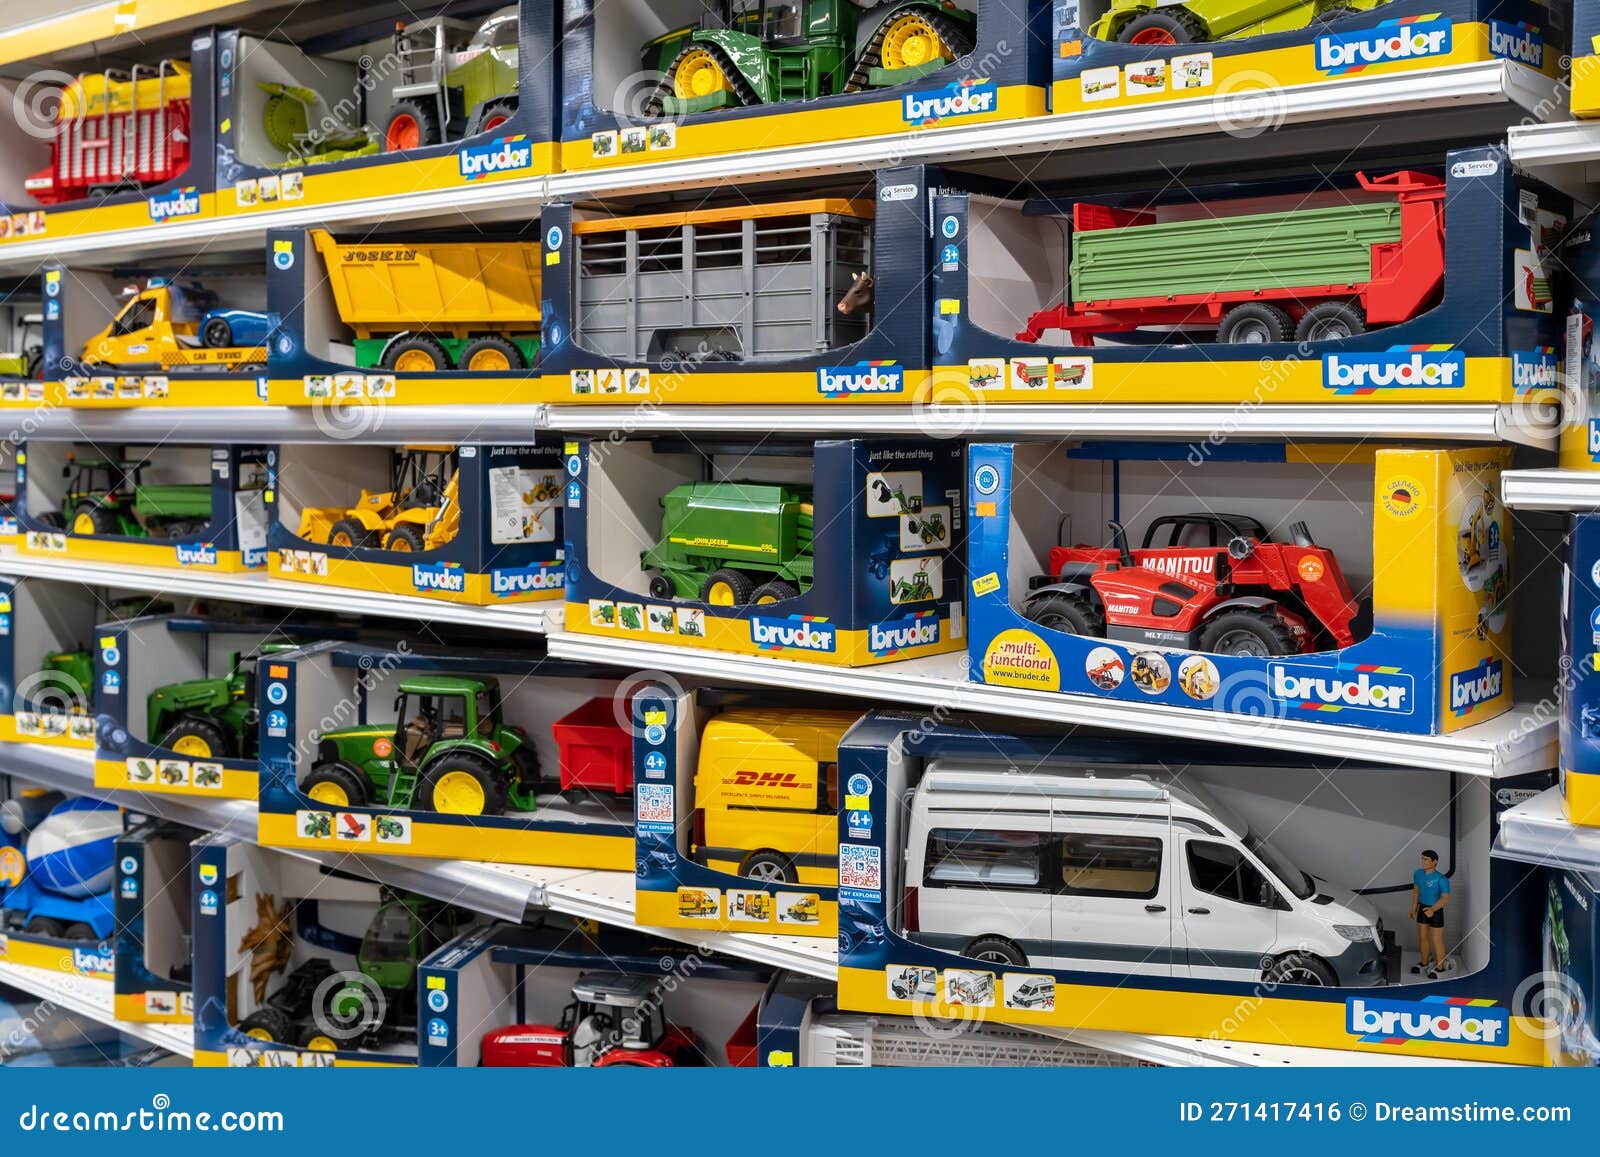 Construction Equipment Toys from the Bruder Brand on the Store Shelf.  Minsk, Belarus, 2023 Editorial Photo - Image of sell, build: 271417416